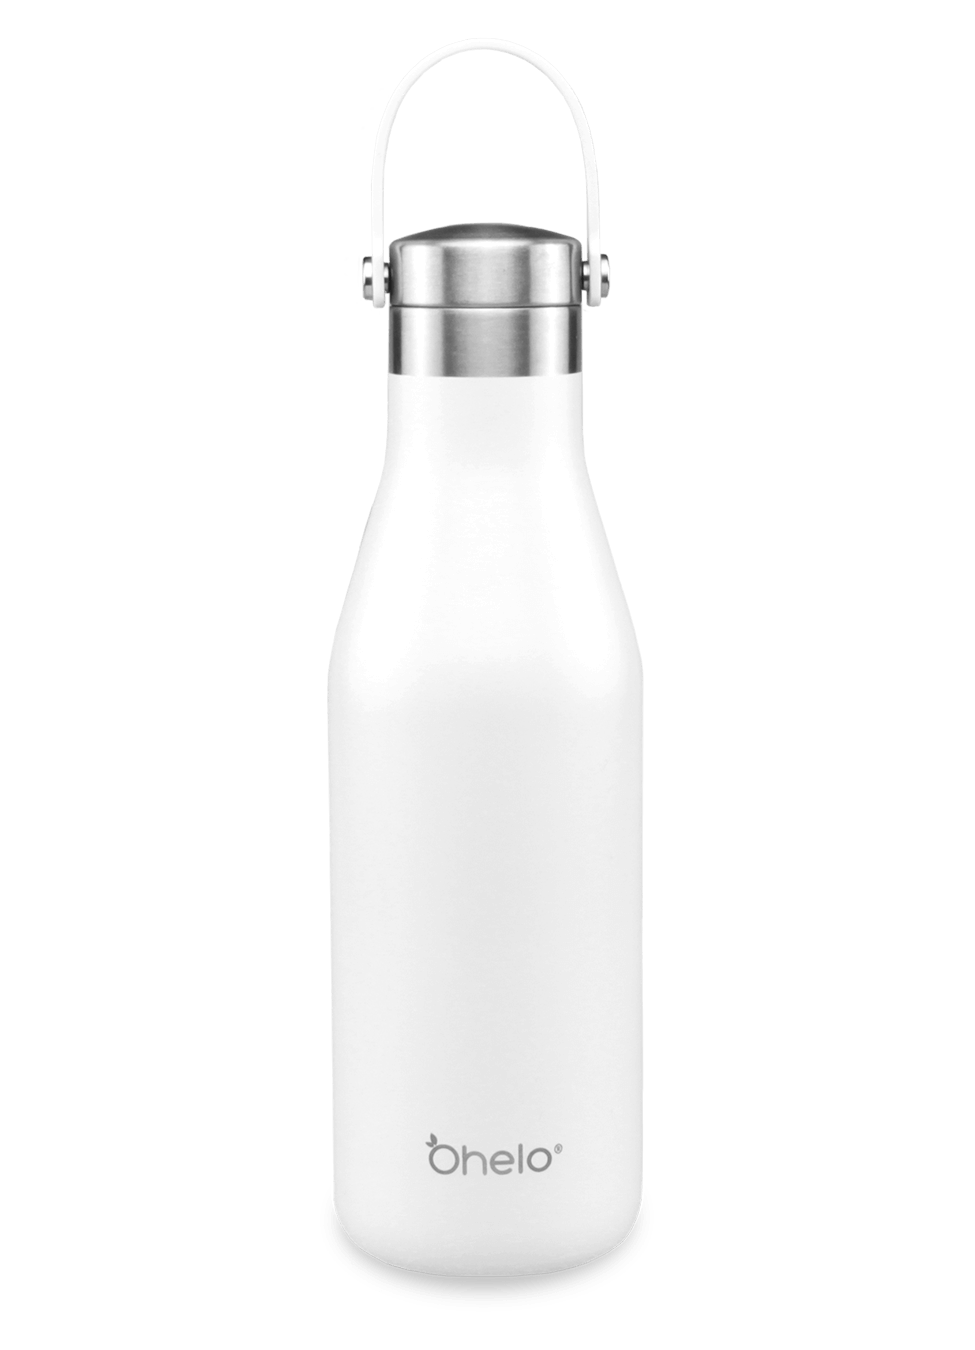 Ohelo reusable stainless steel water bottle white